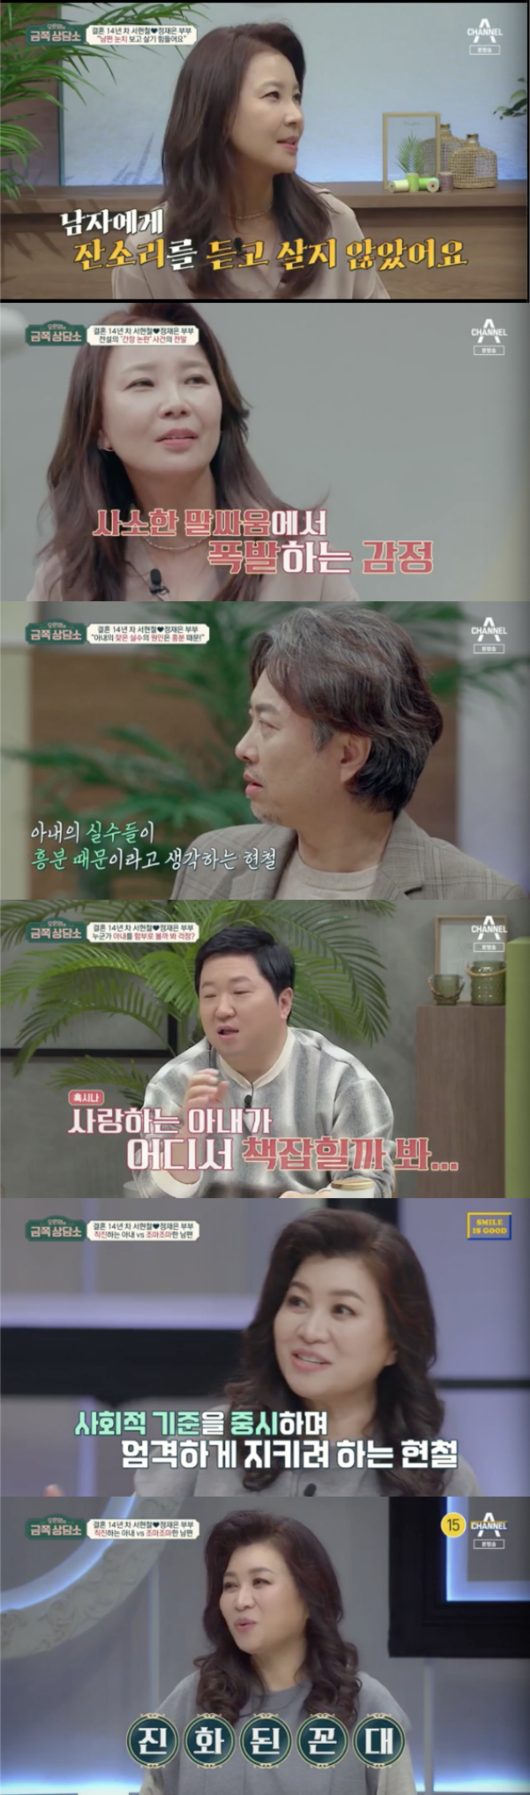 In Oh Eun Youngs Golden Counseling Center, Cheuni confessed that she was a stress because of her husbands sound, and Seo Hyun-chul was diagnosed as evolved zone.Actor Cheuni complained about her husband Seo Hyun-chul in the channel A entertainment program Oh Eun-youngs Gold Counseling Center broadcast on the 18th.Cheuni said, We do the same thing around us, so we ask a lot of questions, Are you sweet at Seo Hyun-chuls house? And I answer, We are a couple.Like other couples, they get tit-for-tat and sensitive, he said.Cheuni said, My husband has a lot of sound, and I think that the ways I express my words can misunderstand people.I want to live with my feelings, but I want to live with my eyes. There are times when I am a little angry. Oh Eun Young asked, How do you feel specifically when you hear the sound? Cheuni said, I dont want to talk about it because Im so angry and angry.I think it is an understandable mistake, but I see myself because of my husbands point of view. Oh said, Alternatively, if your marriage life is over 10 years old, your husbands are afraid of your wifes sound and notice it.Oh Eun Young asked Seo Hyun-chul, Why do you sleep with your wife exceptionally? Seo Hyun-chul said, My wife makes it too easy to get excited.If one person is being unfairly attacked in a situation where two people are fighting, they approach and interfere without worrying, and when they make a claim, they walk their sleeves.She was wearing shorts in the summer, and her daughters education also revealed this problem. Shes more excited than she needs, and shes scared.I think my wifes mistakes are due to excitement, he said.Cheuni retorted, Its so unfair; others say Chain Reaction is good.Seo Hyun-chul said, Chain reaction is too strong if you talk bad.Cheuni said, Everyone around me enjoys my Chain Reaction. Jung Hyung-don, who did not understand Seo Hyun-chul, said, I think my wife is going to be caught up.Oh Eun Young said, Mr. Cheuni is an important person with his standards, and Seo Hyun-chul is an important person with other peoples feelings.Seo Hyun-chul, who I saw, is an evolved era, Cheuni said, a very accurate expression.Seo Hyun-chul said, I did not think I was educated so much after hearing what I was told, but I think I was influenced by my father. He said, I received a moral gift from my father a while ago.When I talk, he talks about Samgang Five-Run. Cheuni said: My father-in-law is worried that Son, who is over 50, will make a mistake outside; my husbands sound seems to be a rich war.Seo Hyun-chul said, I have not felt it in the meantime, but I think what I said was great.Oh Eun Young said, There is one thing that caught my eye in the middle of this: I saw the results of the satisfaction of the marriage of the two, and Jae Eun found that he lacked emotional communication with his husband.Cheuni said, If you do not tell me, I do not know the other persons mind. I want my husband to tell me one day, How are you so beautiful?If I had gone out and had a bad thing, he was the only one who would complain, and he would point out my behavior rather than empathy.I felt sorry for someday, he said.Dr. Oh said, Skinship is very important among couples, external skinship is important, and internal skinship is important. Internal skinship means communication through dialogue.However, no matter how good the intention is, you should not force your opponent. You should choose a democratic dialogue that respects your choice and decision. External skinship does not necessarily mean sexual intercourse, it means communication through physical contact, such as holding hands, touching shoulders and expecting.Channel A entertainment program Oh Eun-youngs Gold Counseling Center broadcast screen capture